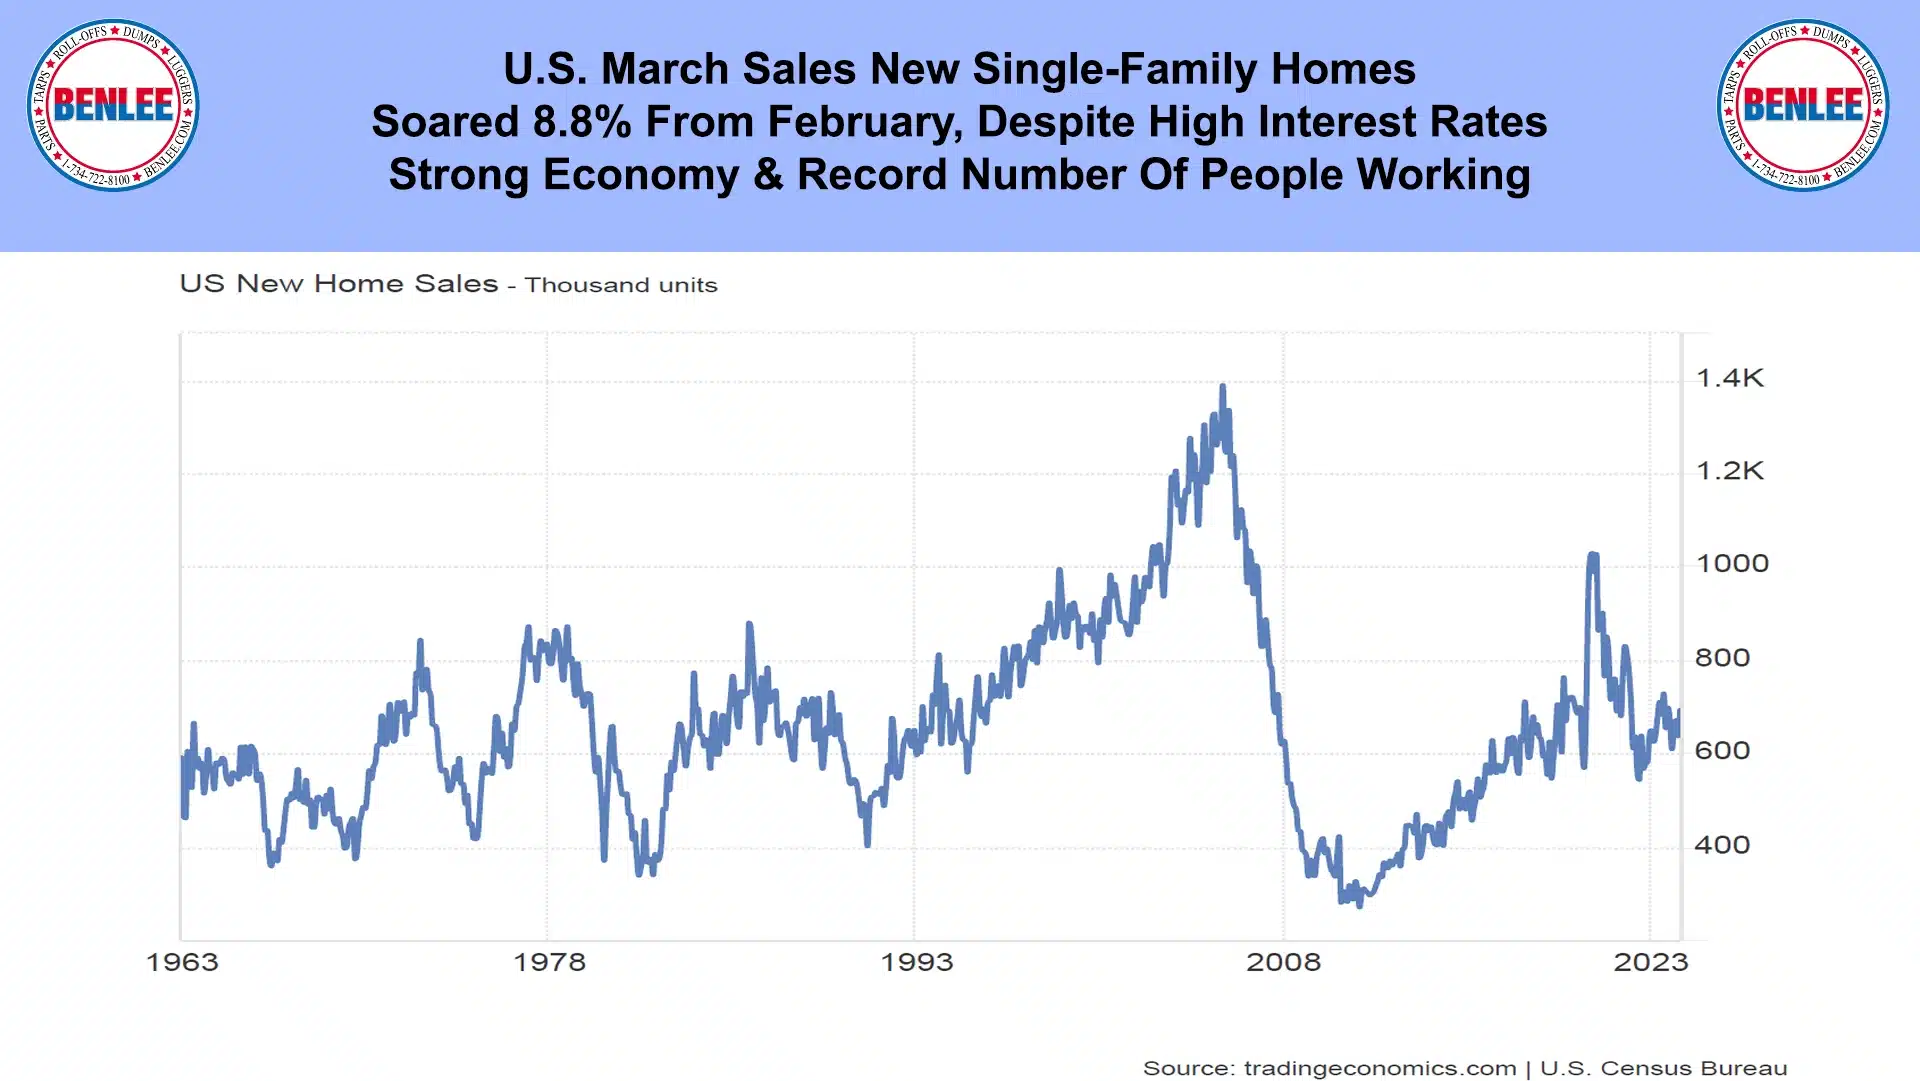 U.S. March Sales New Single-Family Homes